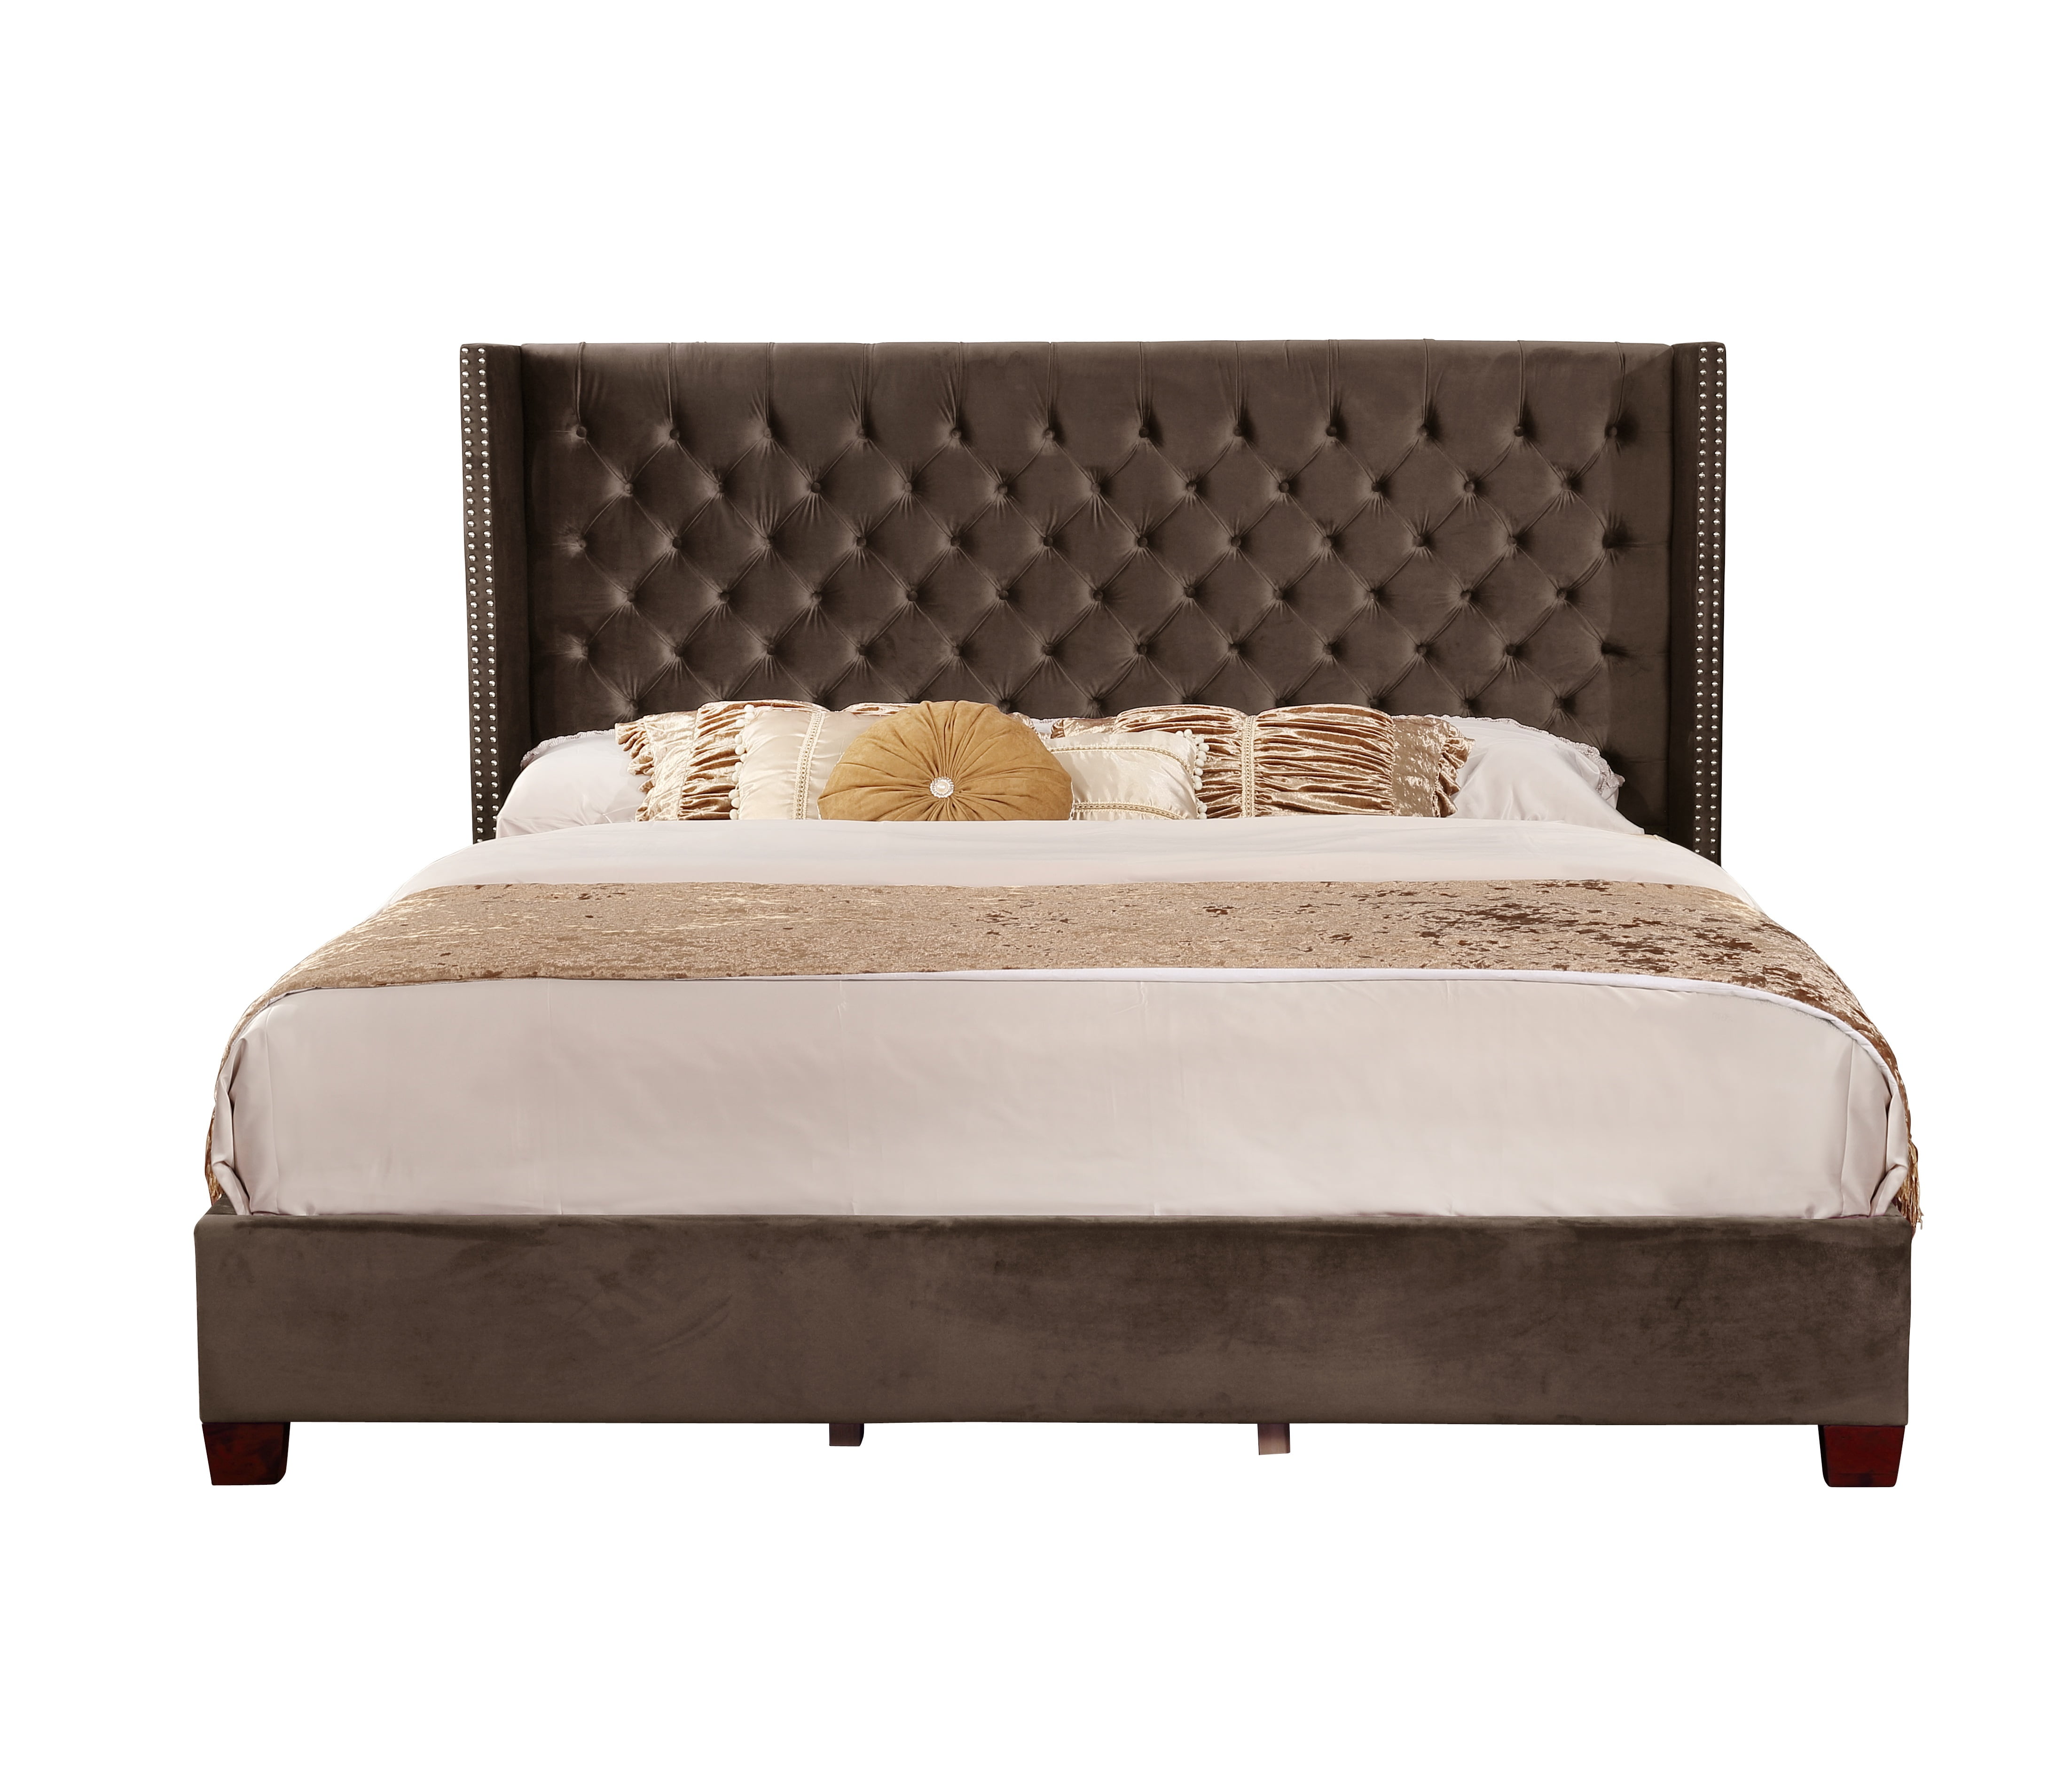 Details about   Dark Brown Tufted Upholstered Headboard Twin Full Queen King Bed Frame Mount 